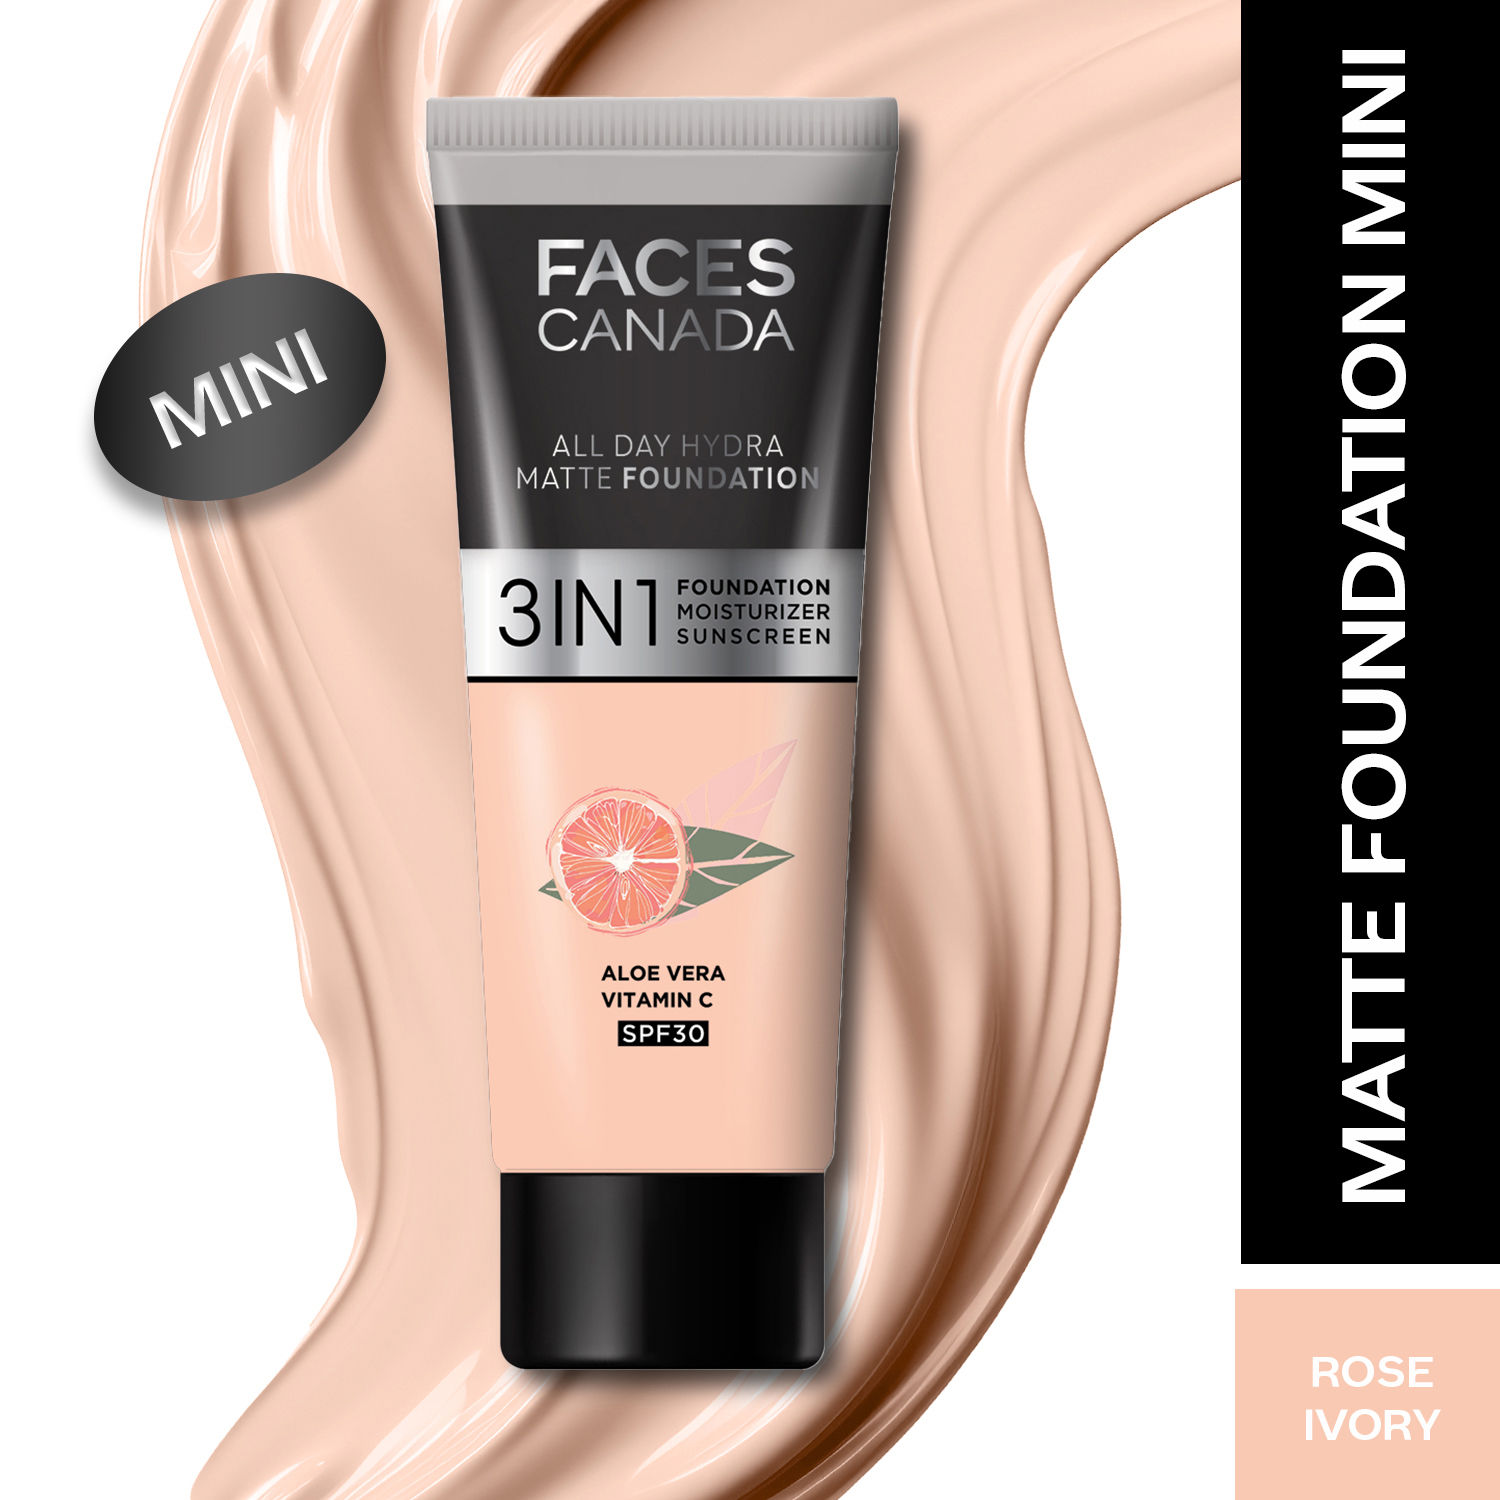 Buy FACES CANADA All Day Hydra Matte Foundation Rose Ivory 011 15ml | SPF 30 | 24HR Hydration | Aloe Hydration | Oil-Free Matte | Vit C | Paraben Free | Alcohol Free | No Mineral Oil | Vegan - Purplle